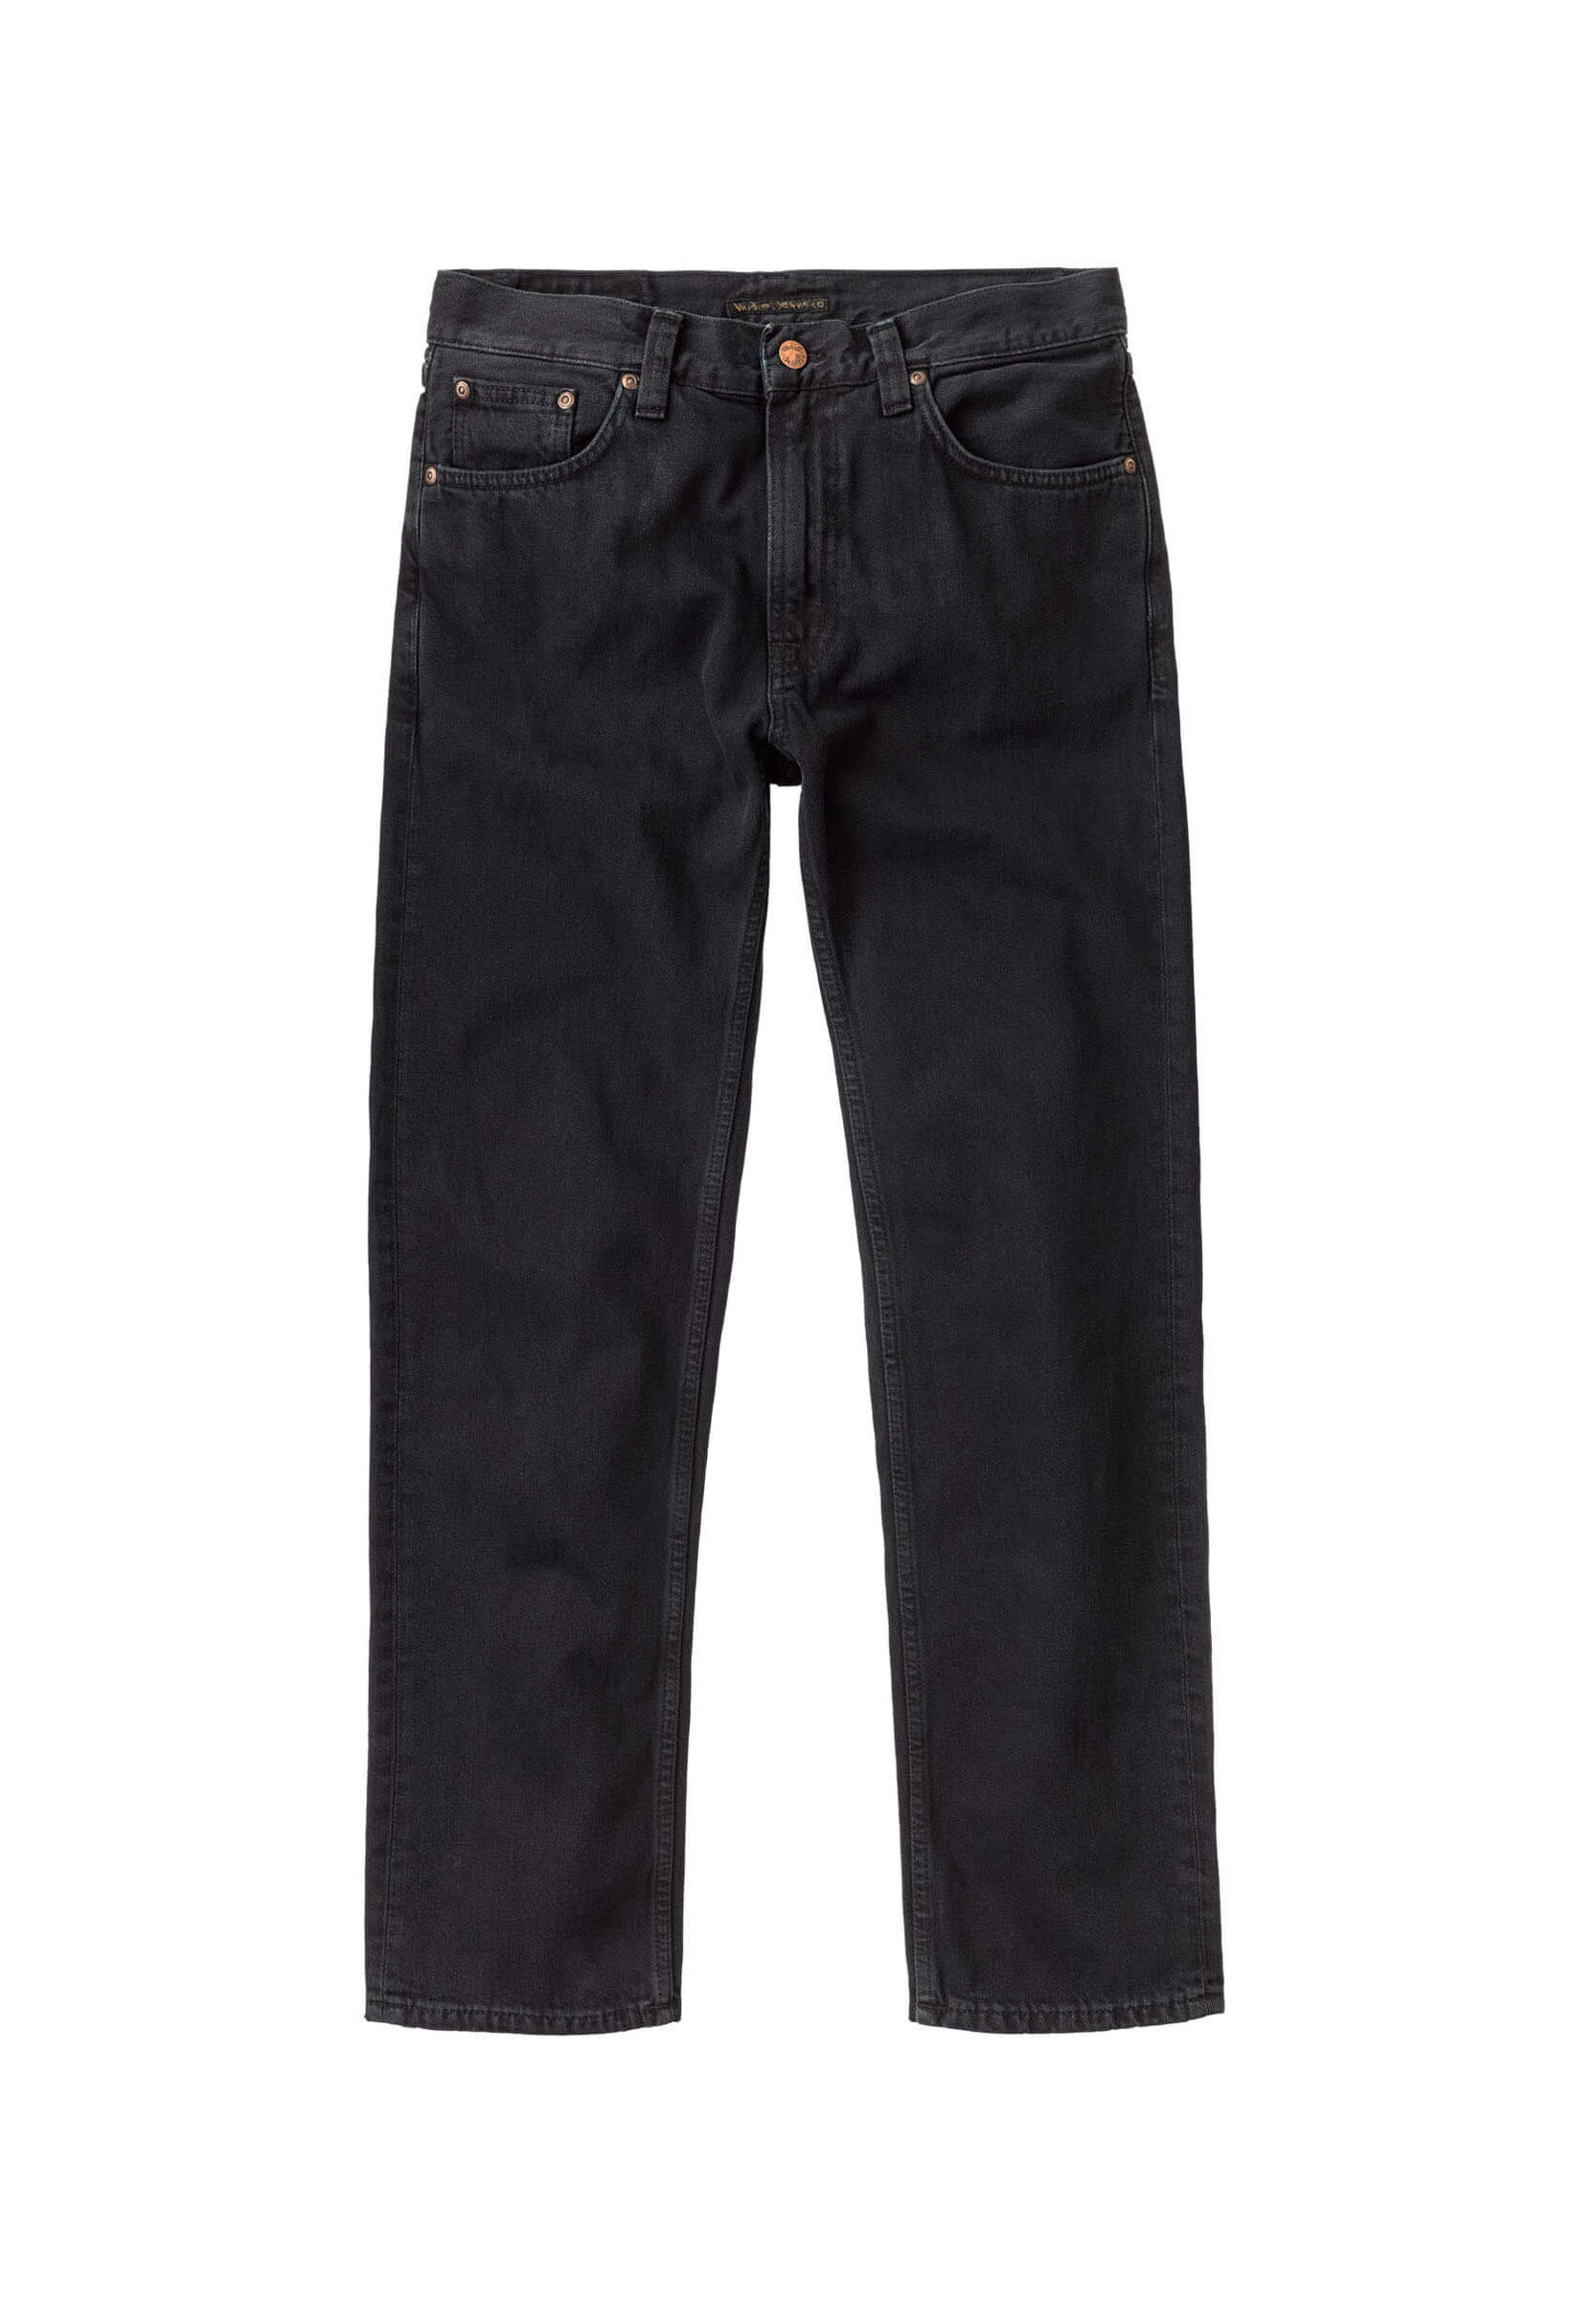 NUDIE JEANS Jeans Gritty Jackson black forest 29/30